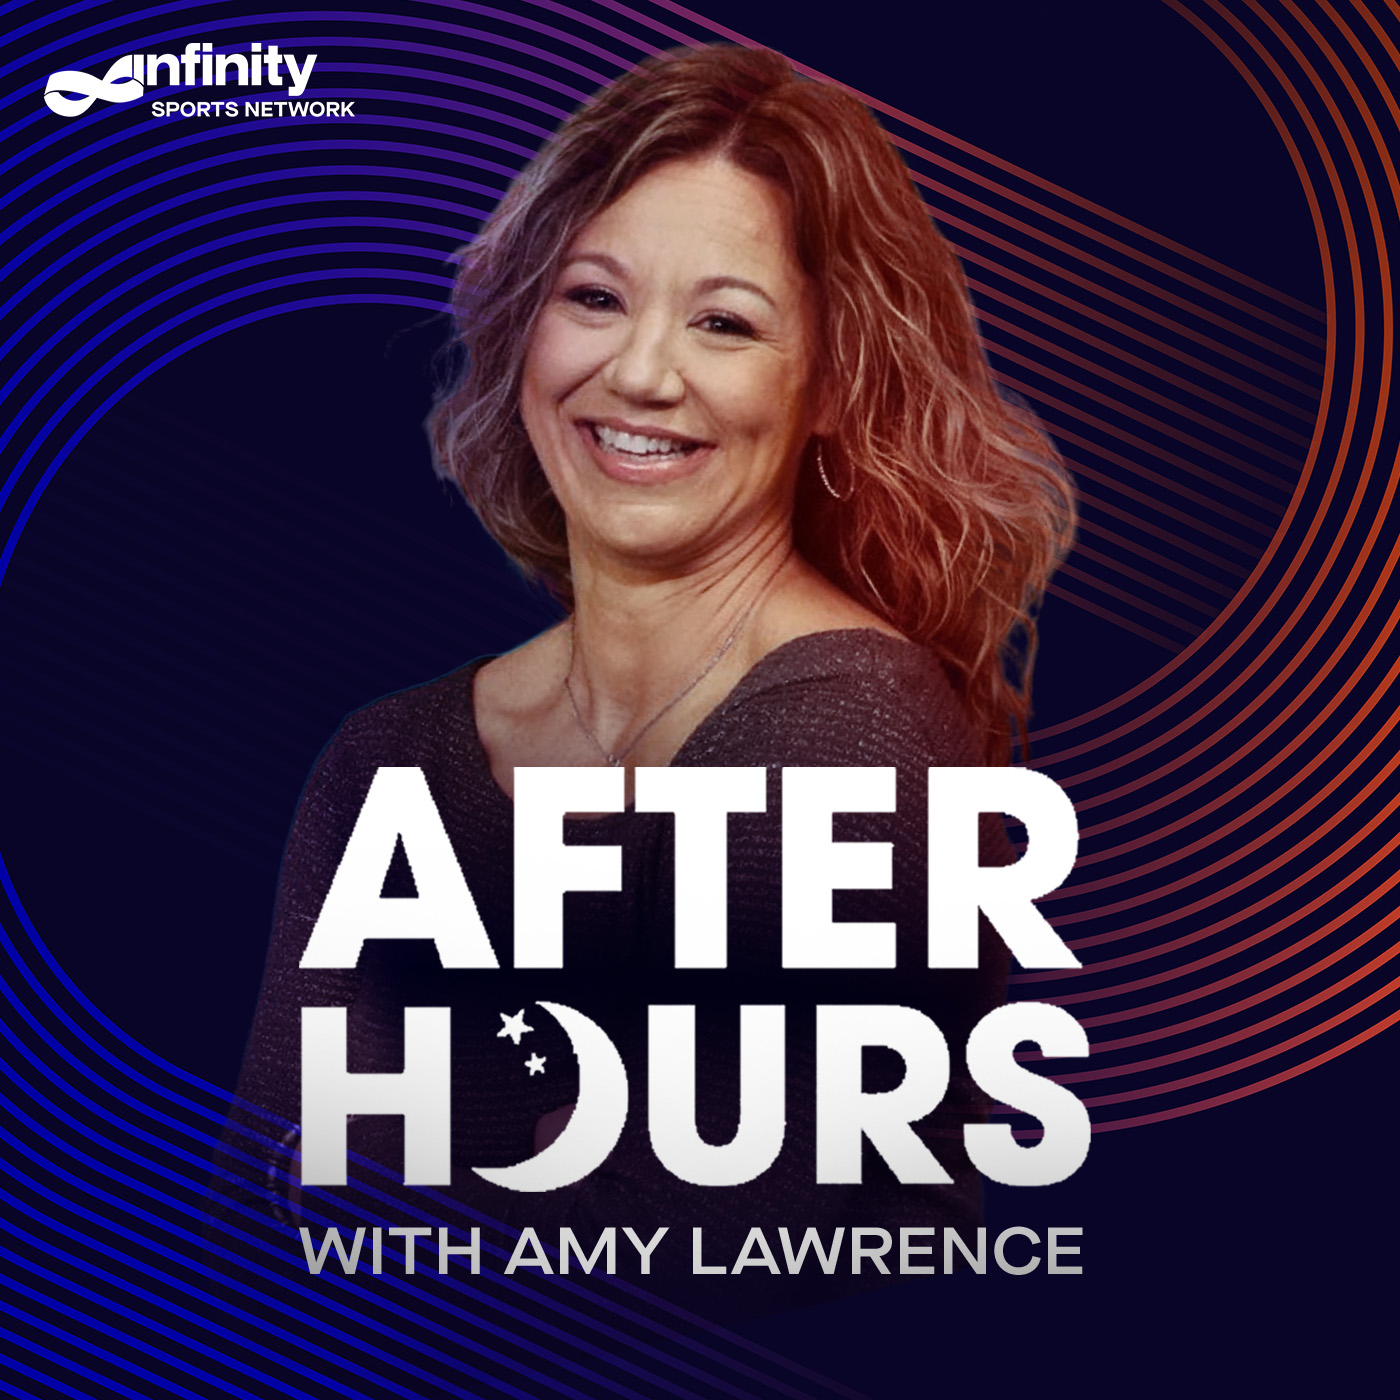 1-13-22 After Hours with Amy Lawrence PODCAST: Hour 4